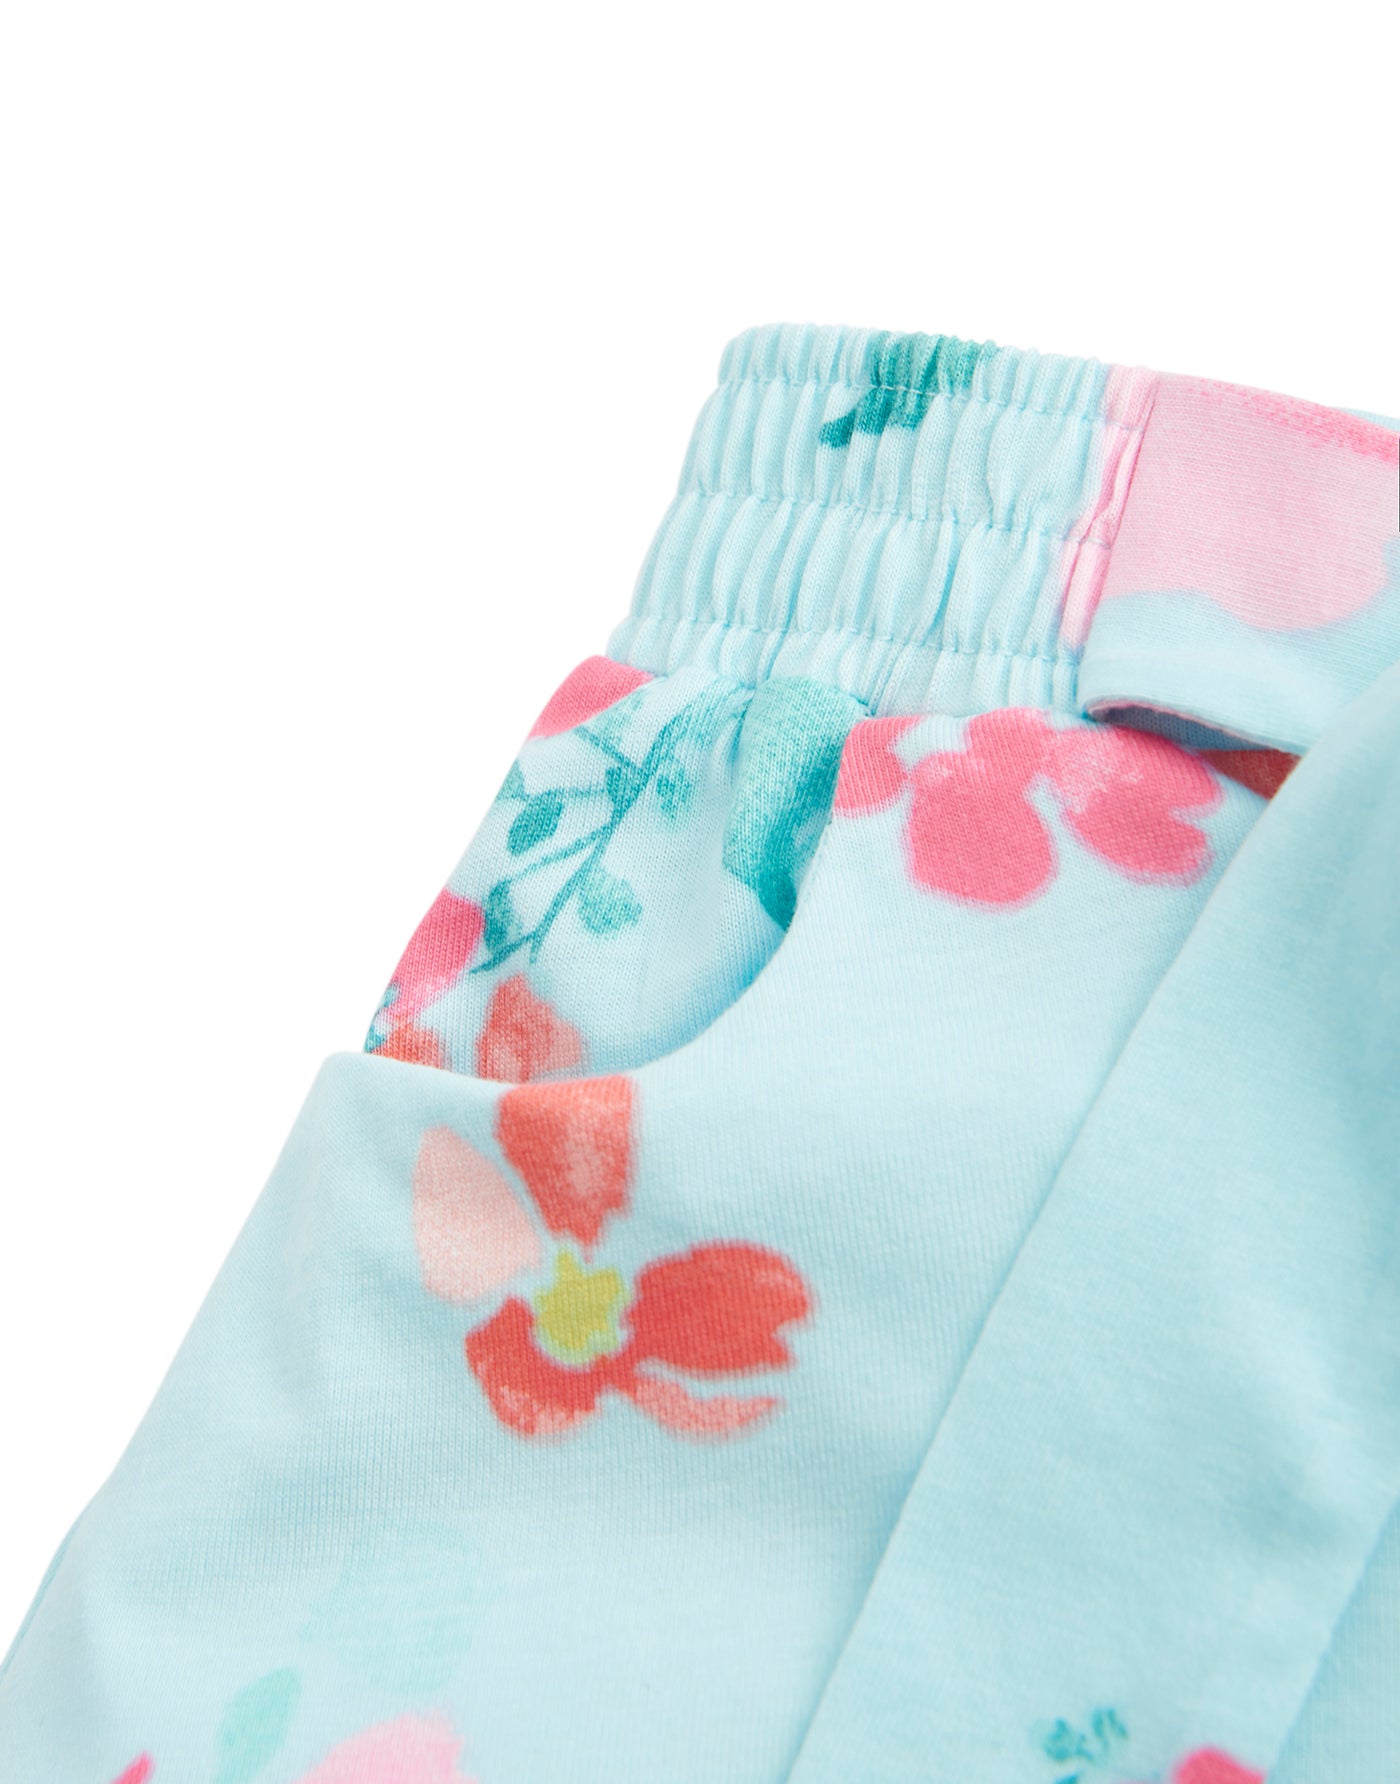 Joules Gabby Jersey Printed Culottes - Aqua Floral